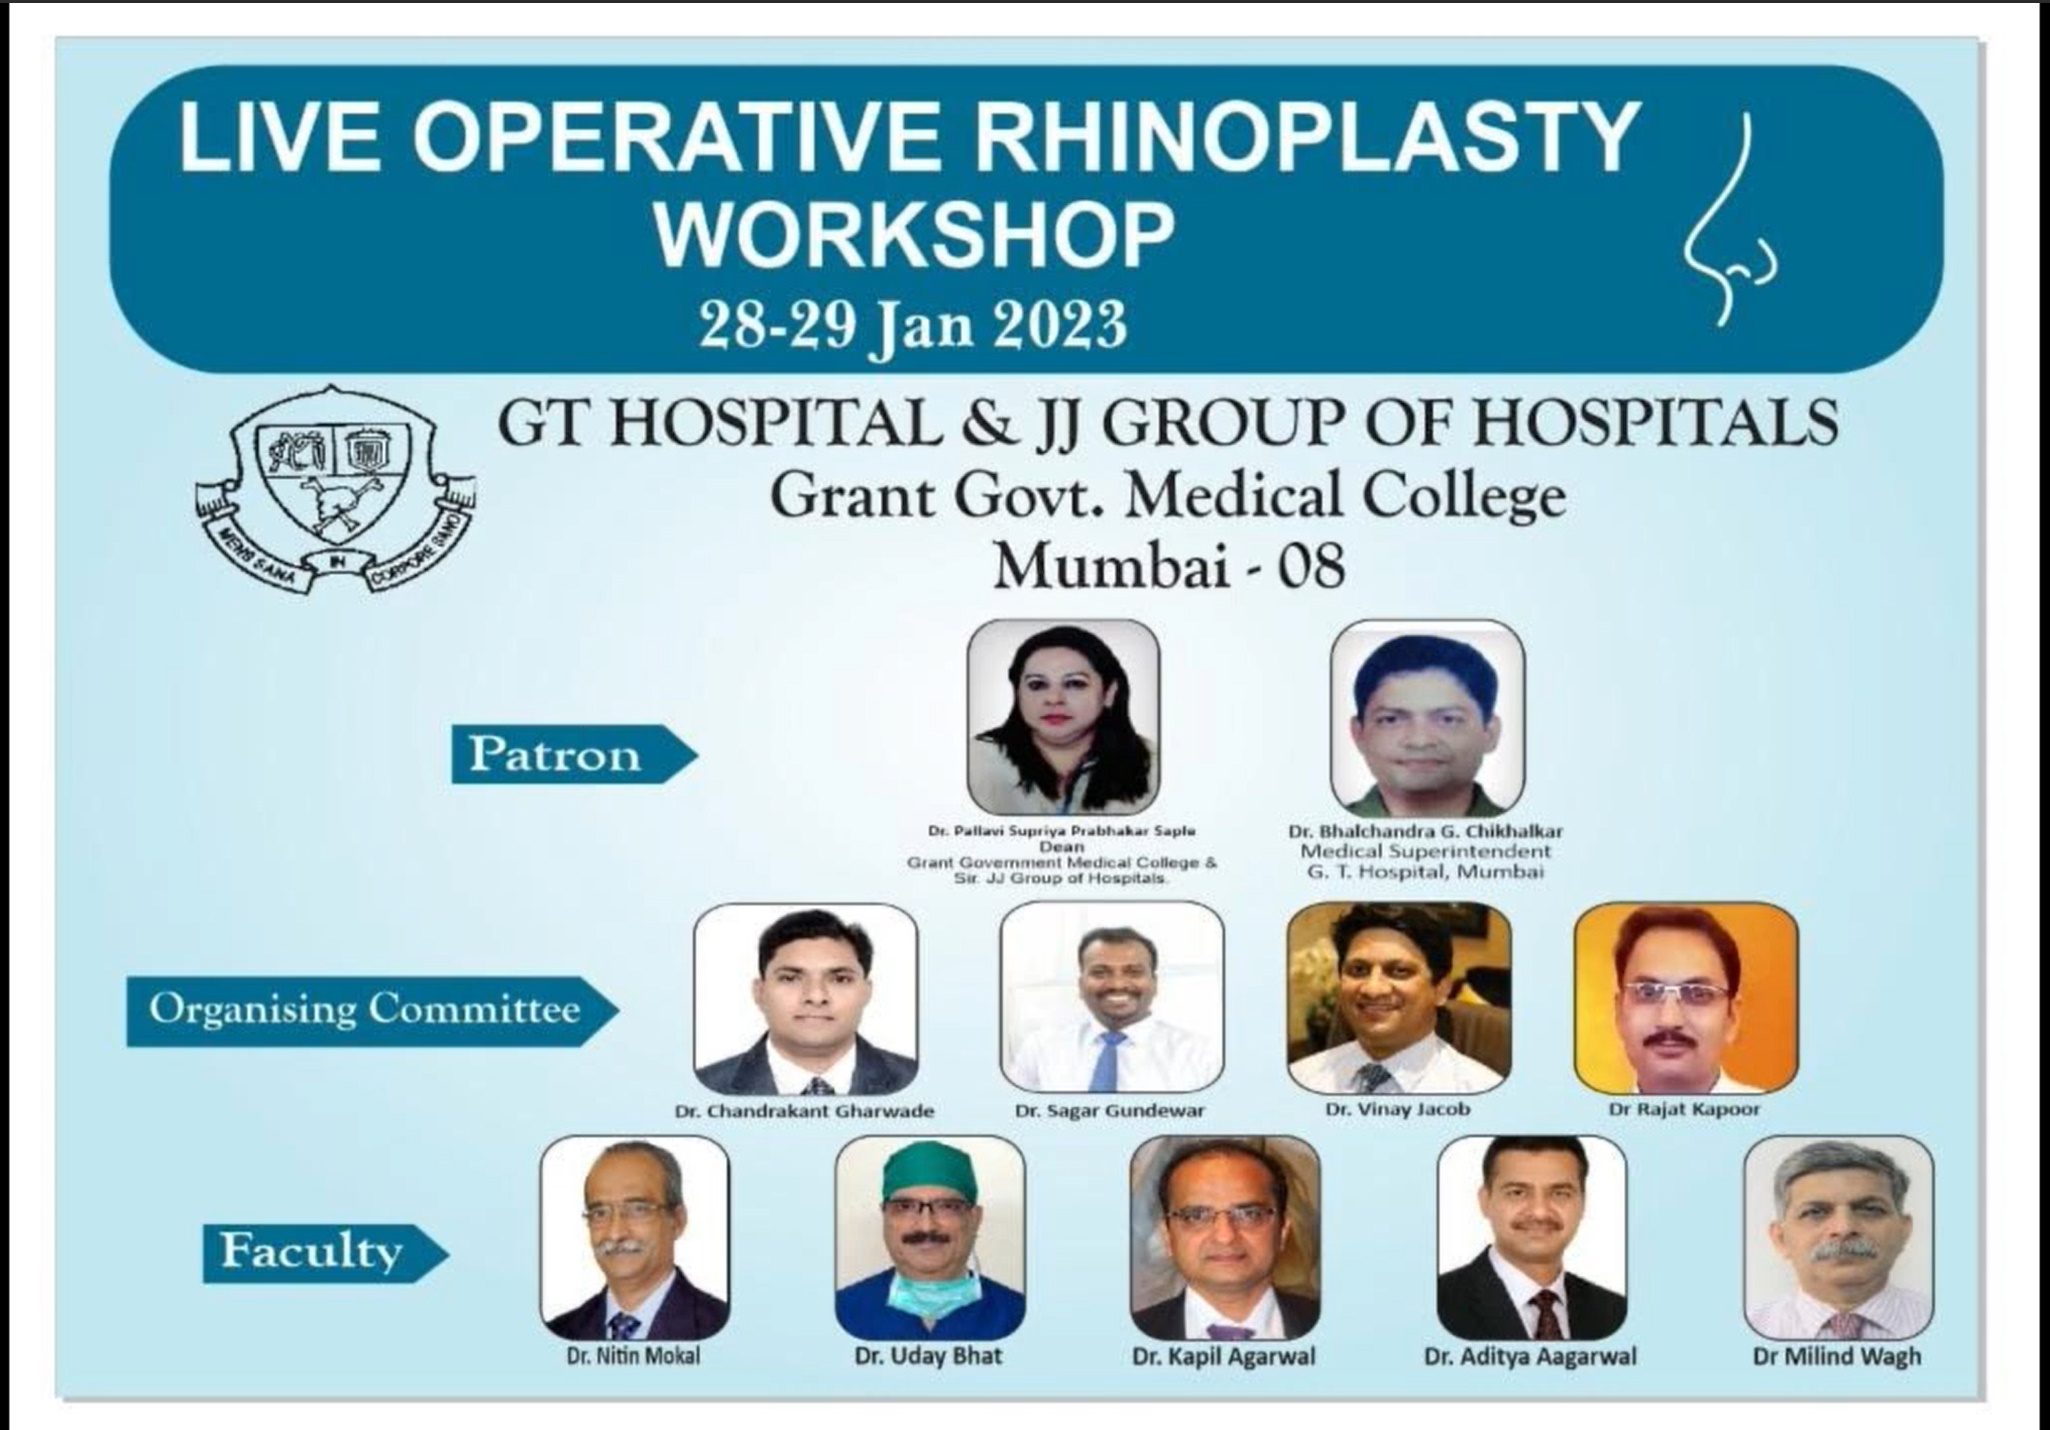 GT Hospital & JJ Group of Hospitals, Grant Government Medical College 4th Live Operative Rhinoplasty Workshop 2023